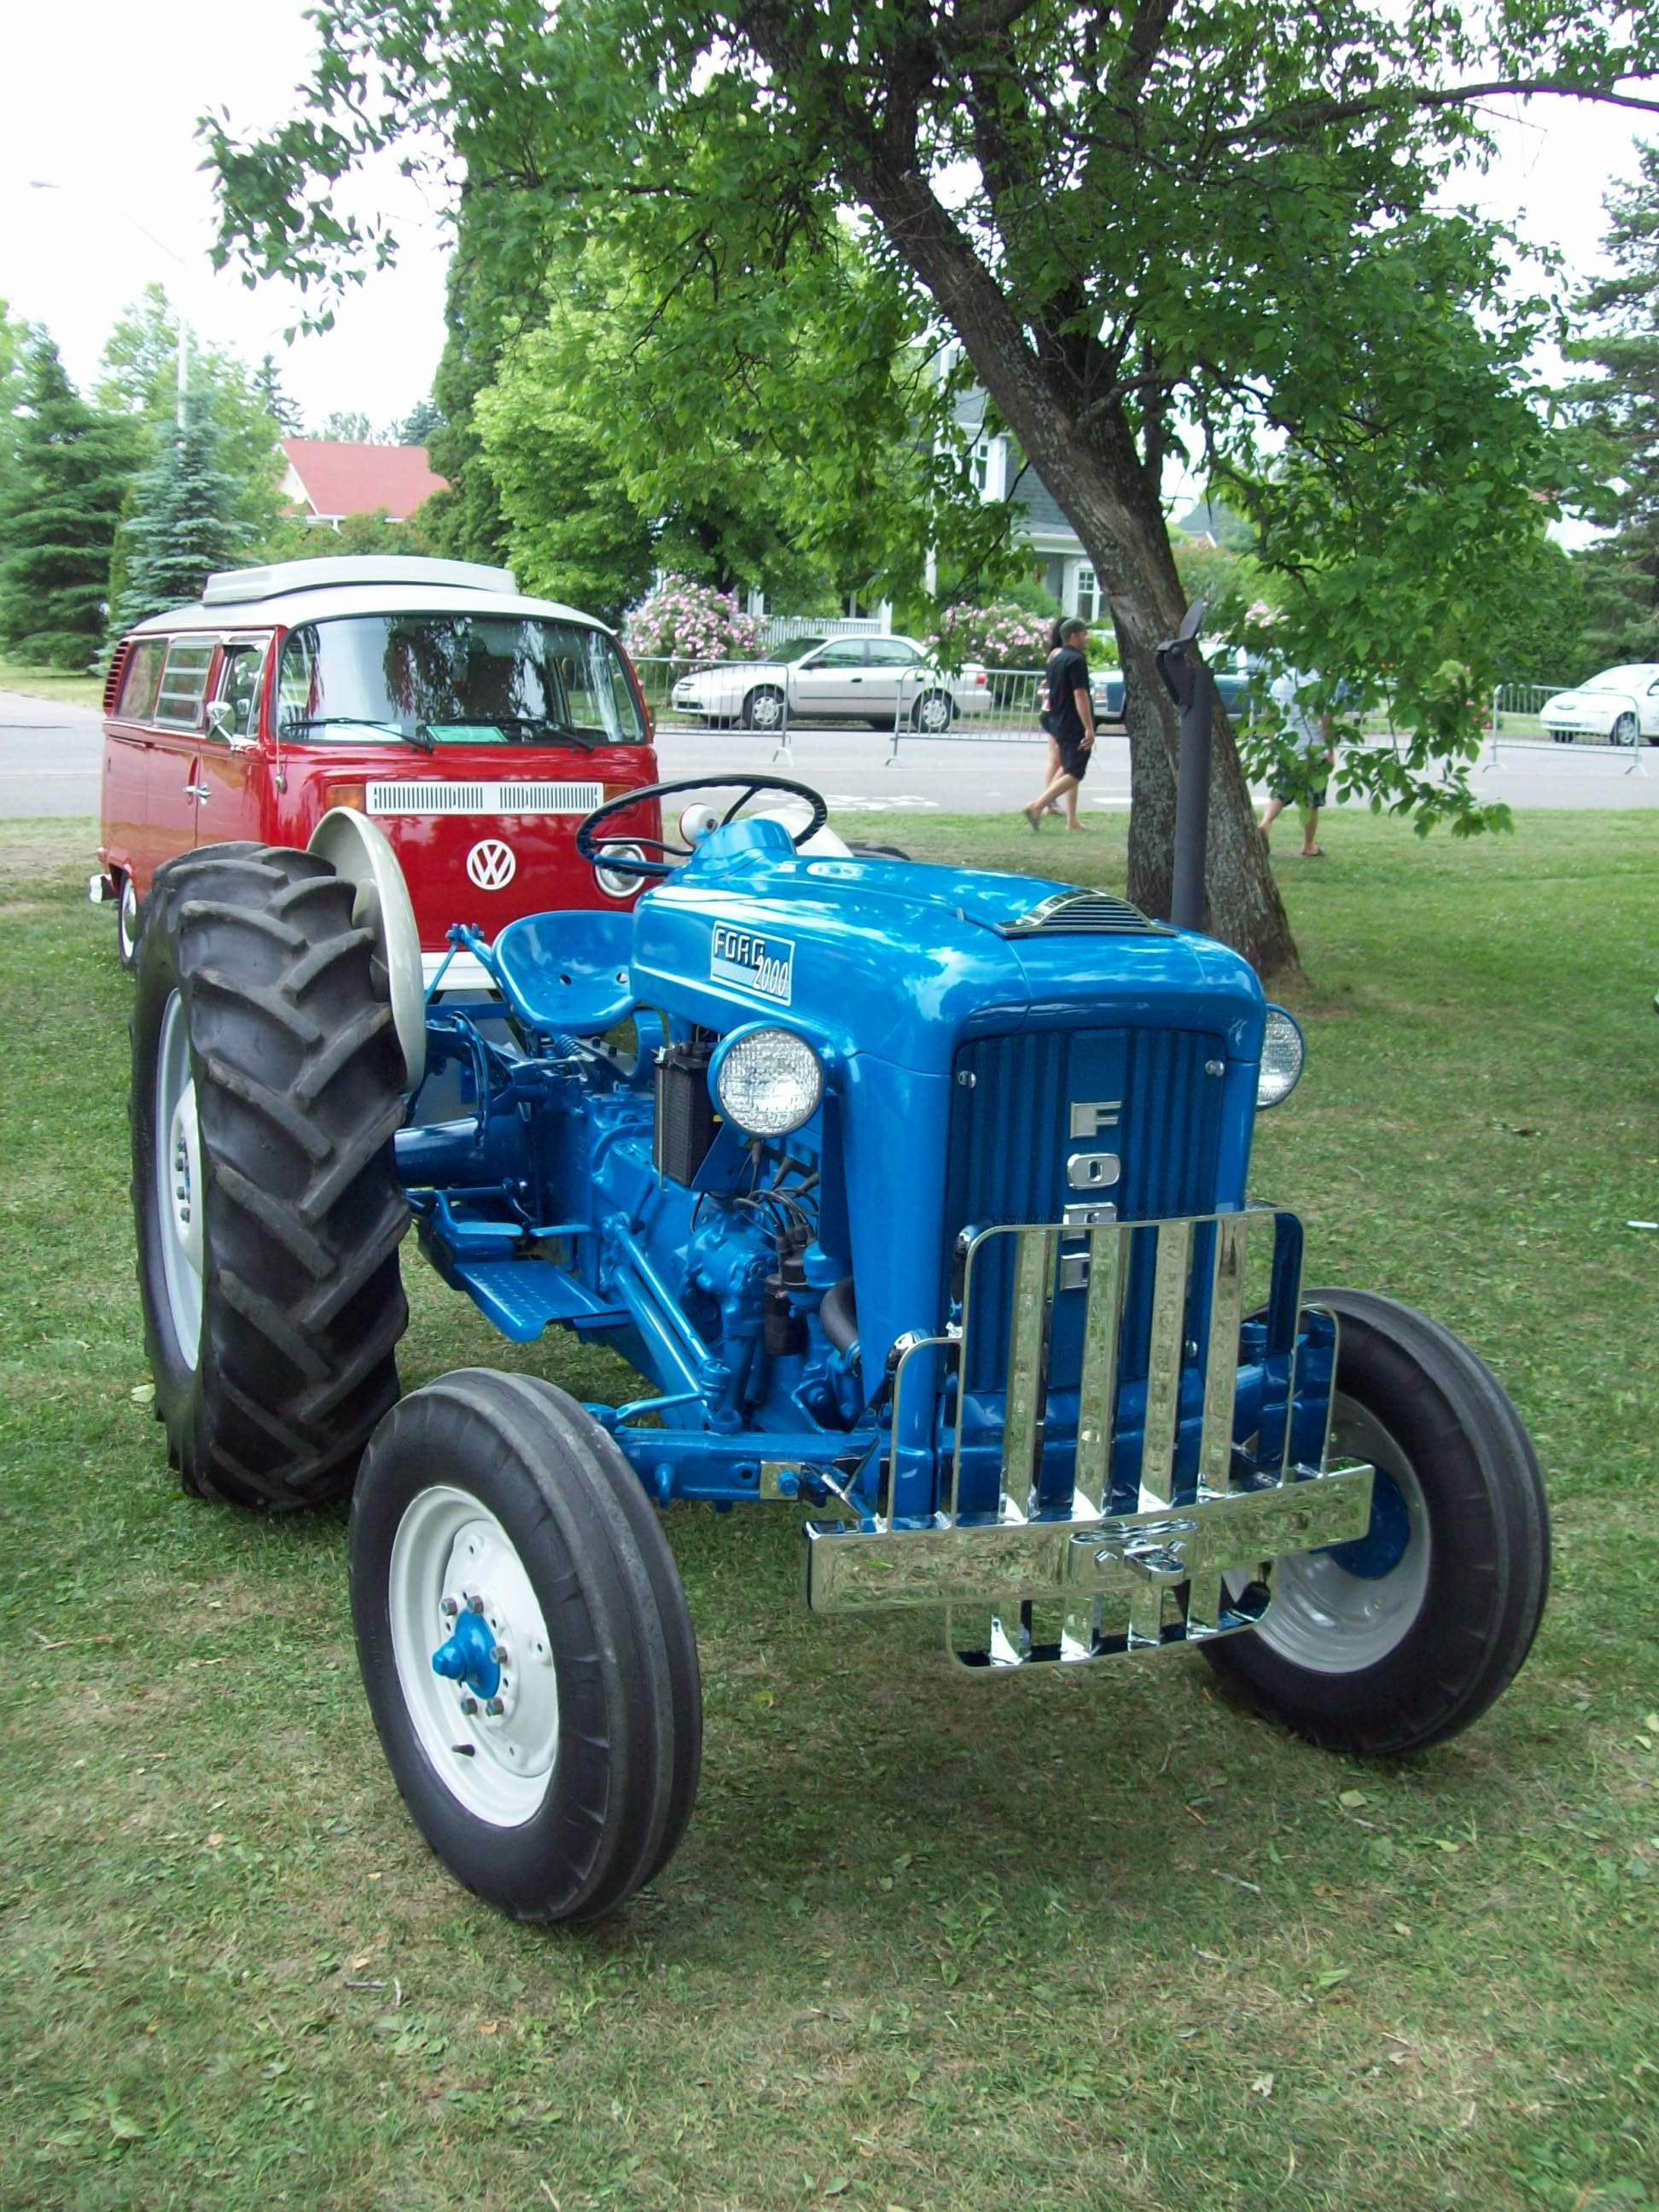 What is the horsepower of a ford 2000 tractor